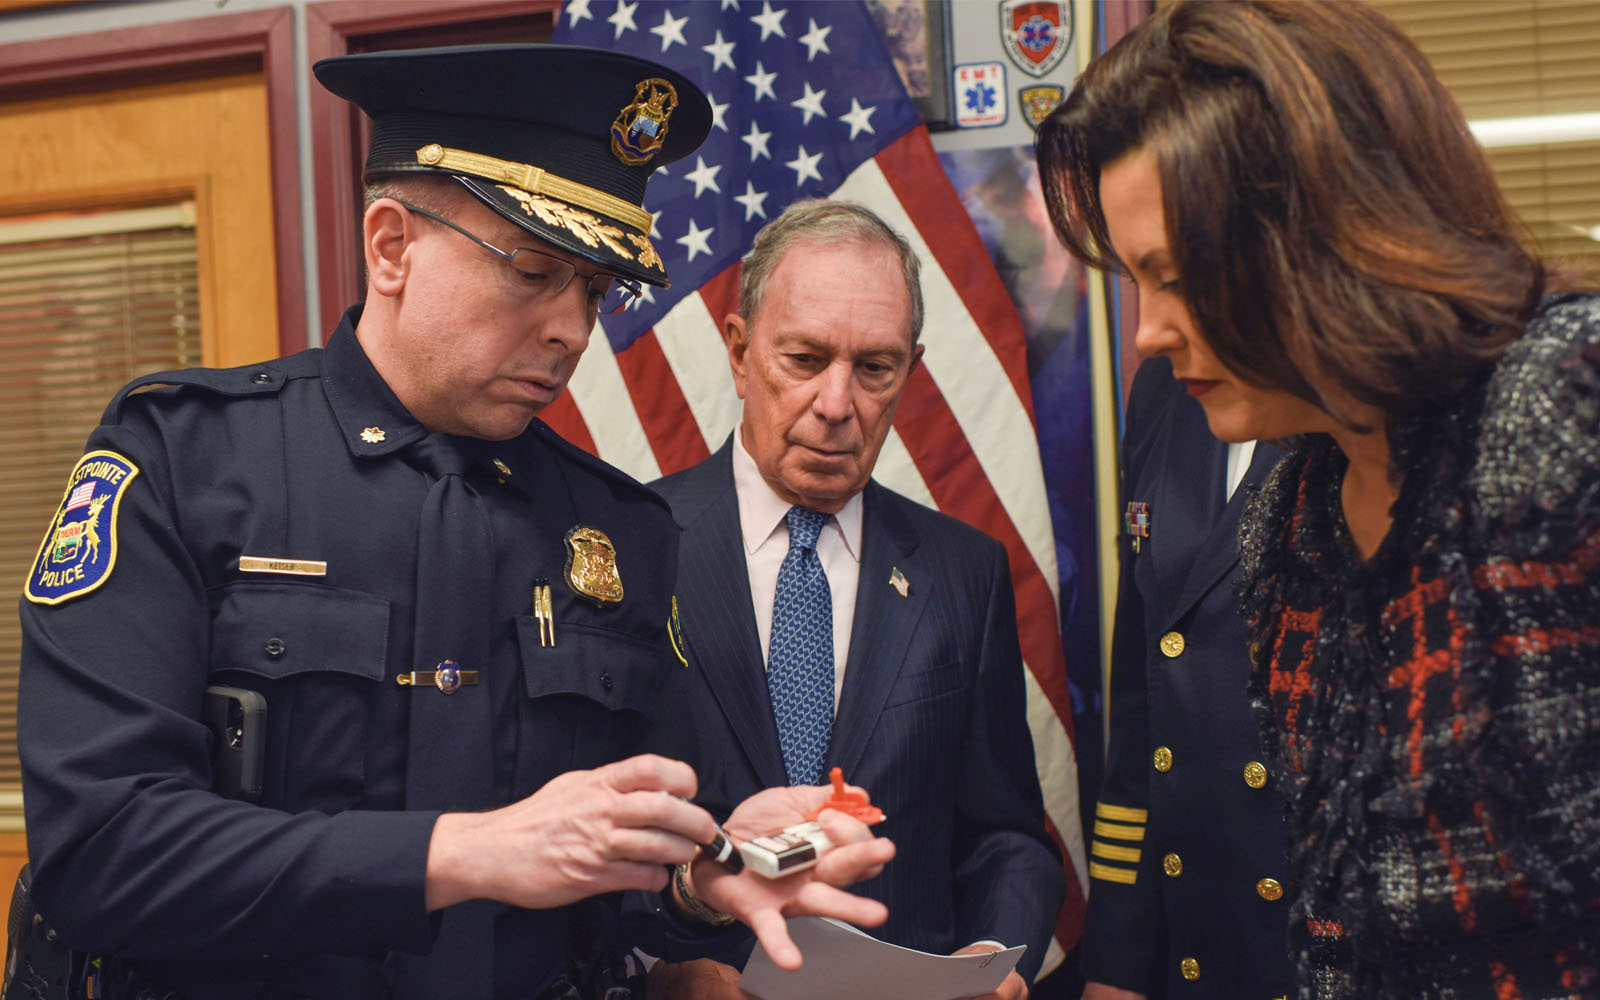 Deputy Police Chief Eric Keiser of Eastpointe, Michigan, demonstrates how to administer the overdose-reversing drug naloxone for Mike Bloomberg and Michigan Governor Gretchen Whitmer.